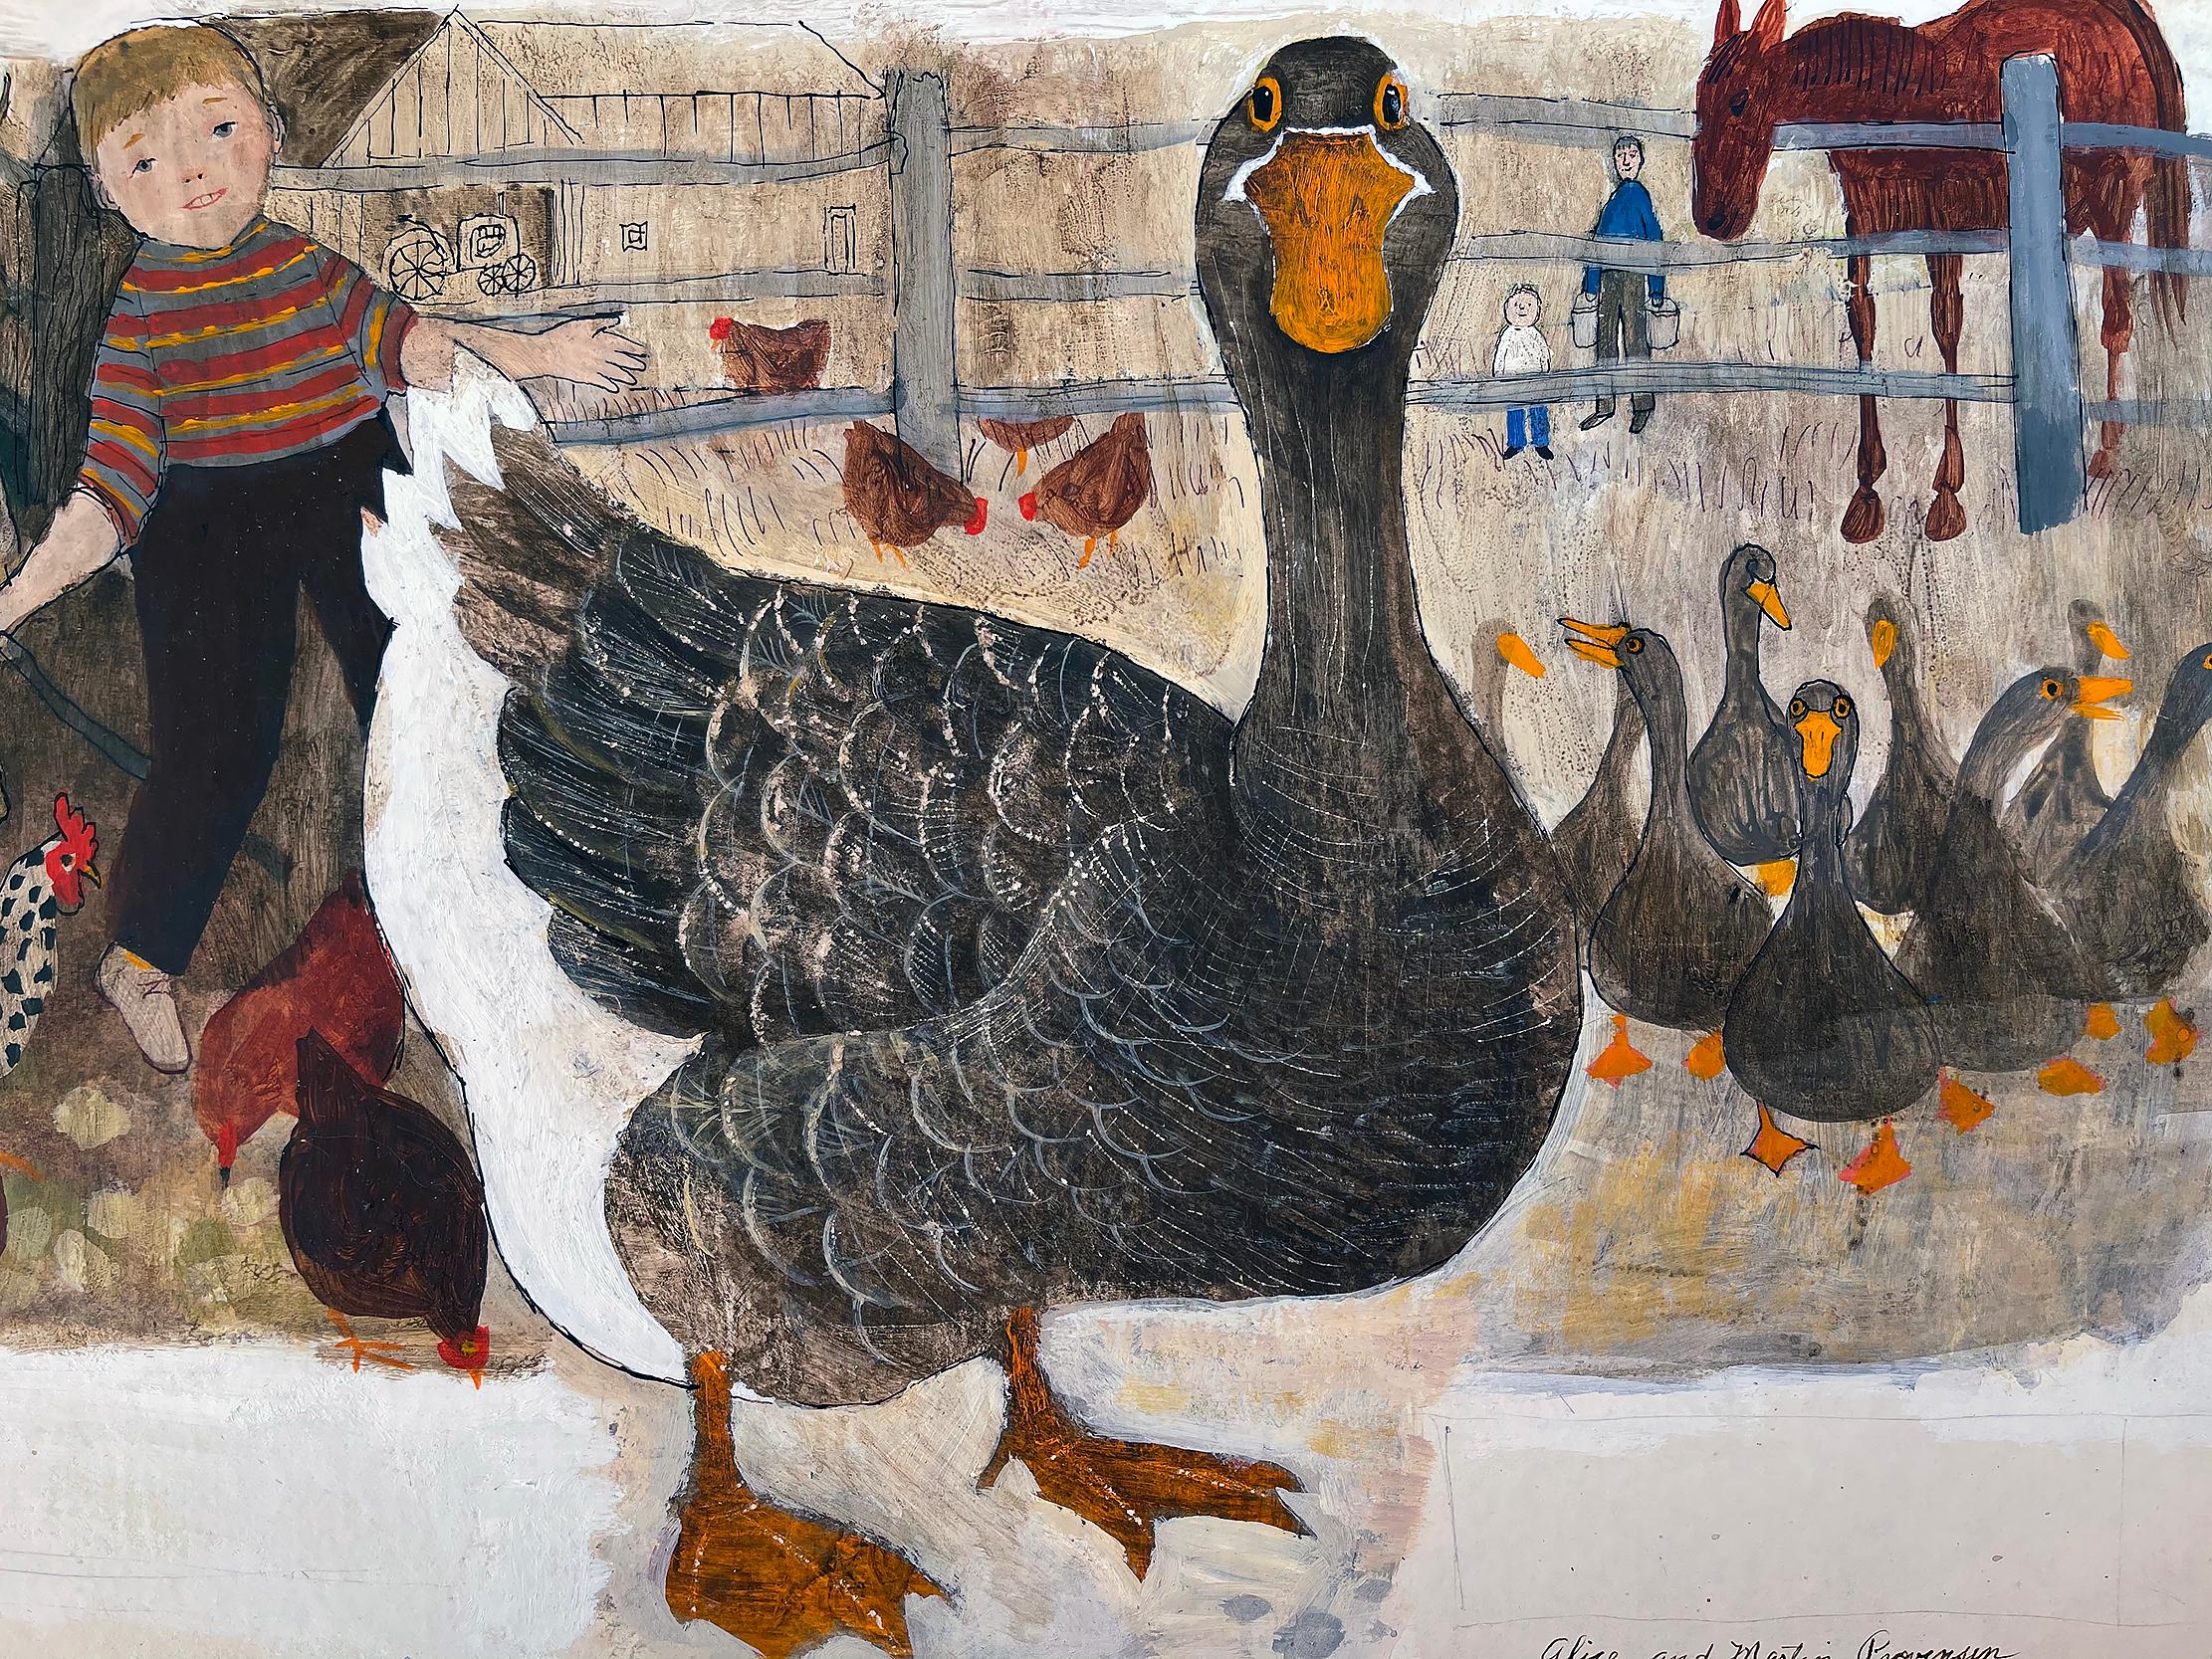 Duck in Farm with Horse, Goat and Chickens.  Children's book illustration - Outsider Art Painting by ALICE and  MARTIN PROVENSEN